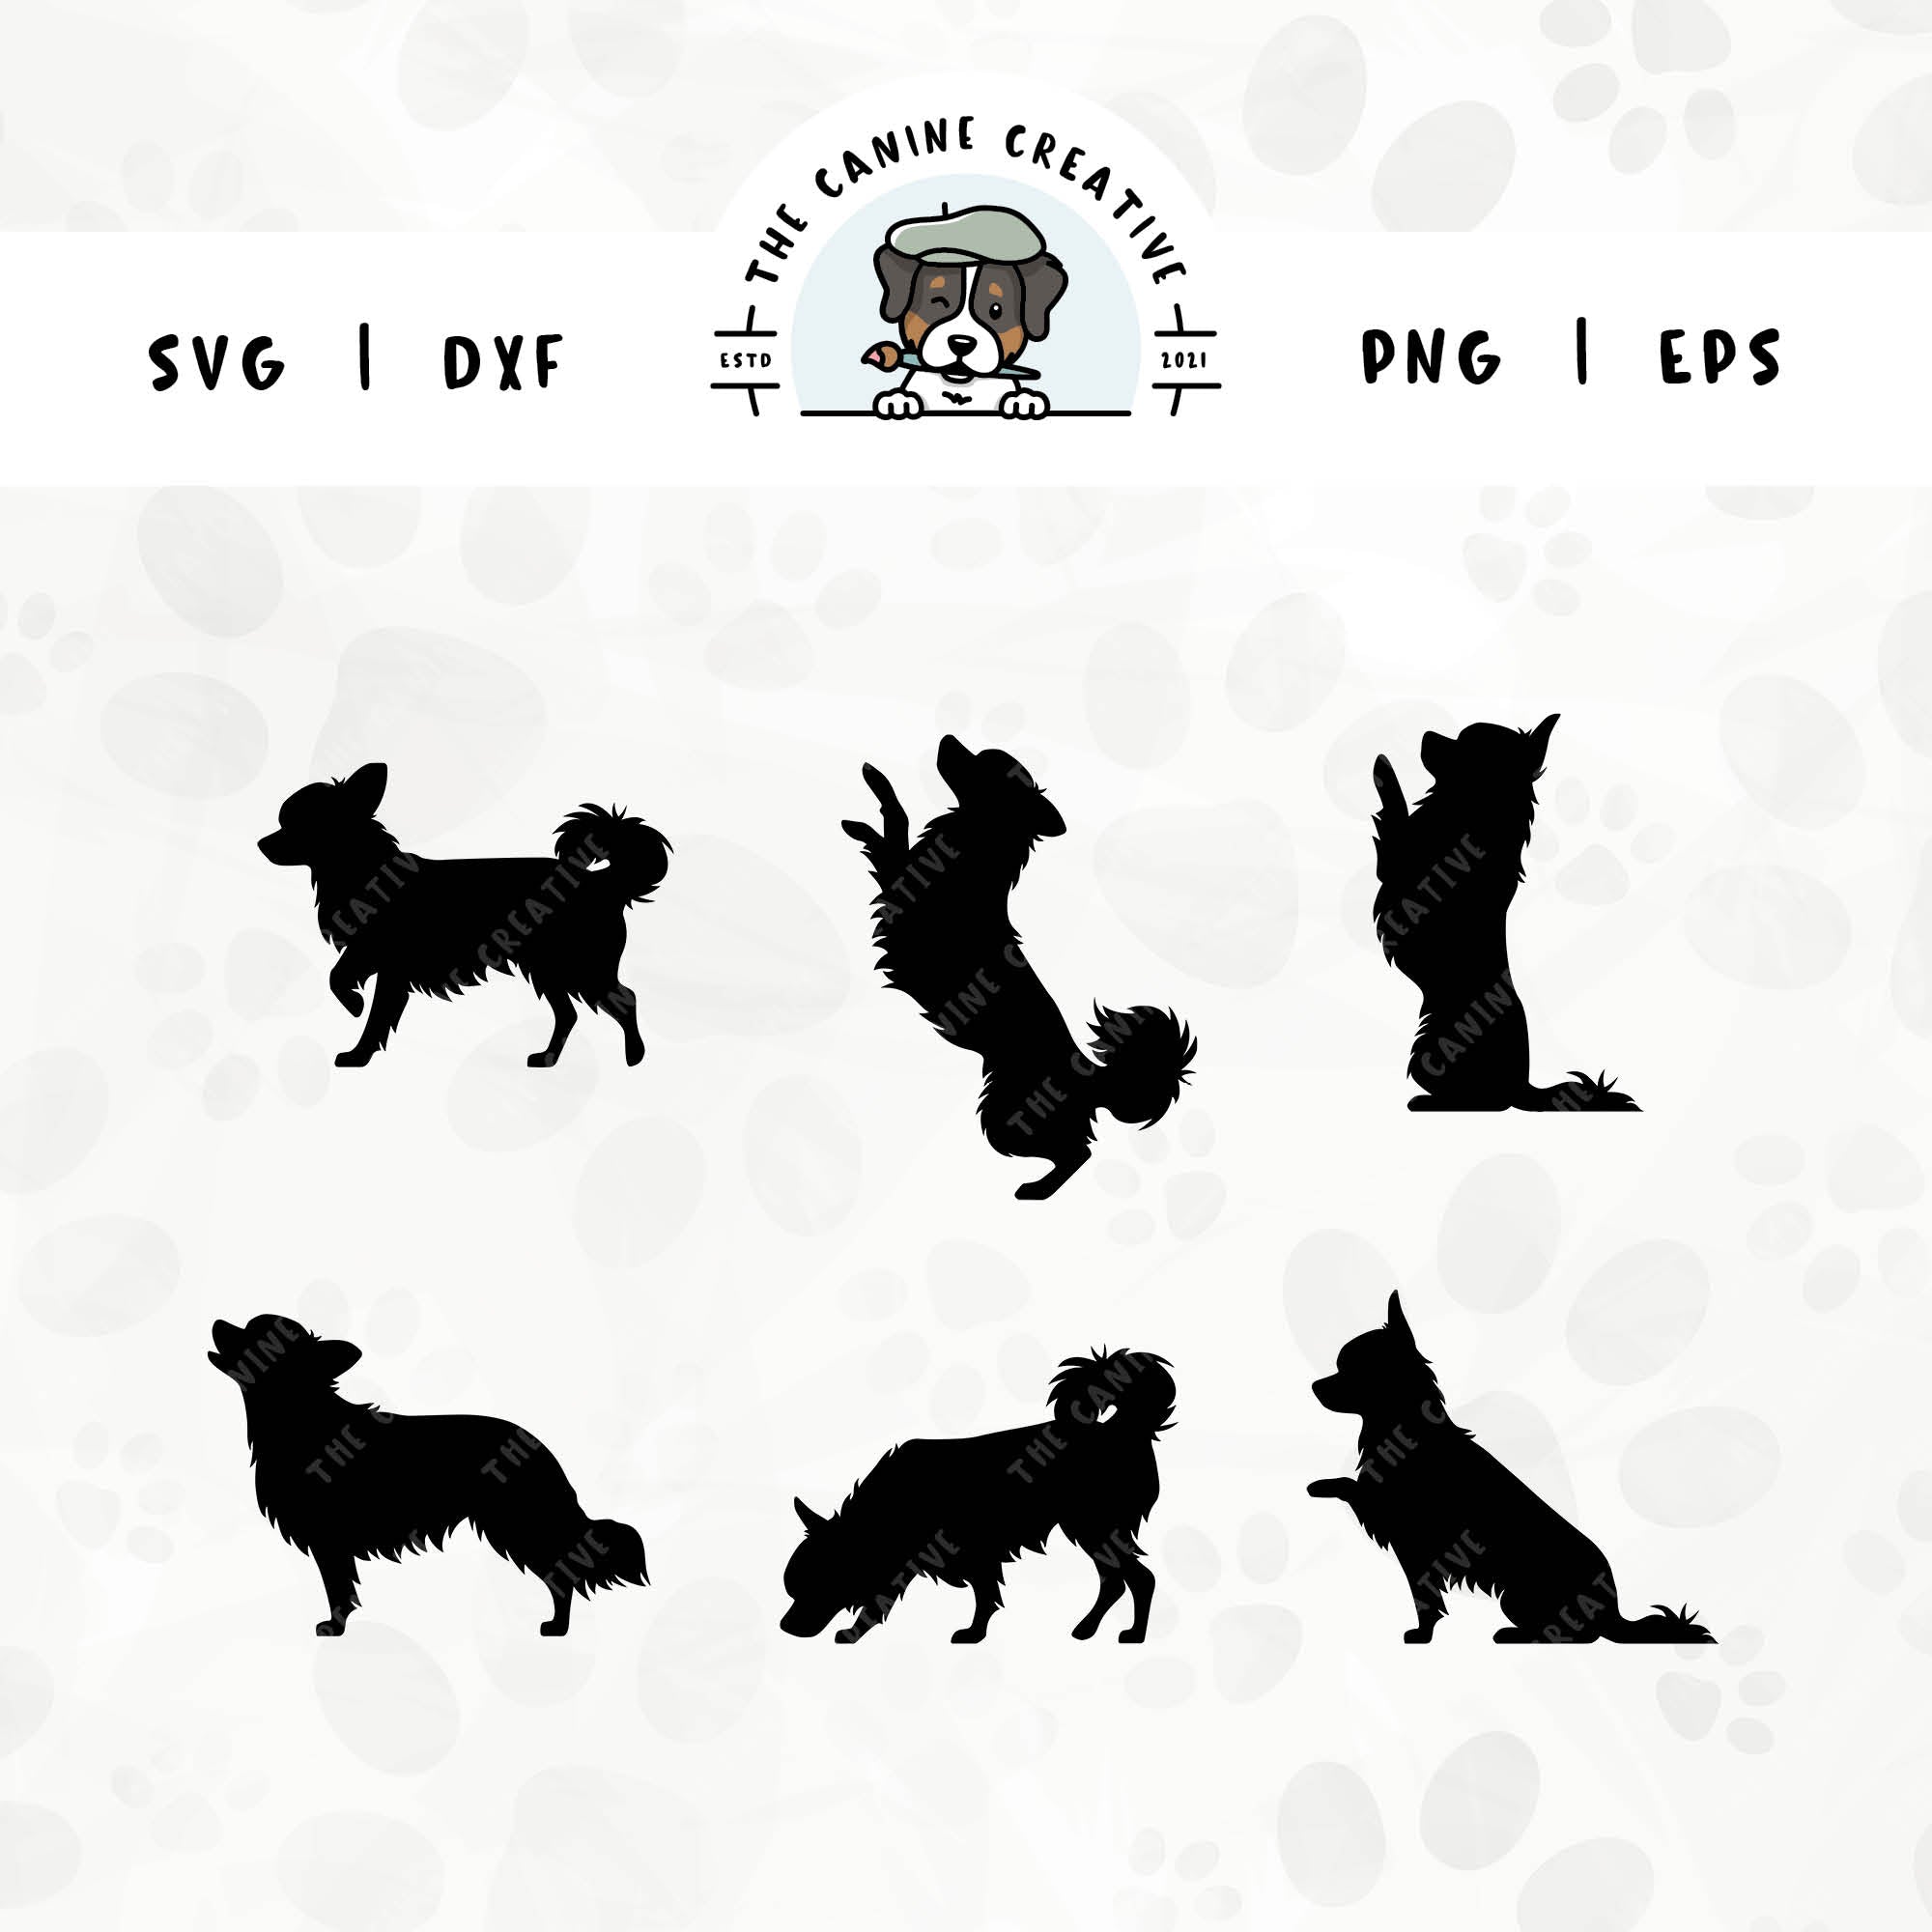 This 6-pack Long Haired Chihuahua silhouette bundle (set 2) features various dog poses including walking, jumping up, begging, barking, sniffing, and shaking a paw. File formats include: SVG, DXF, PNG, and EPS.